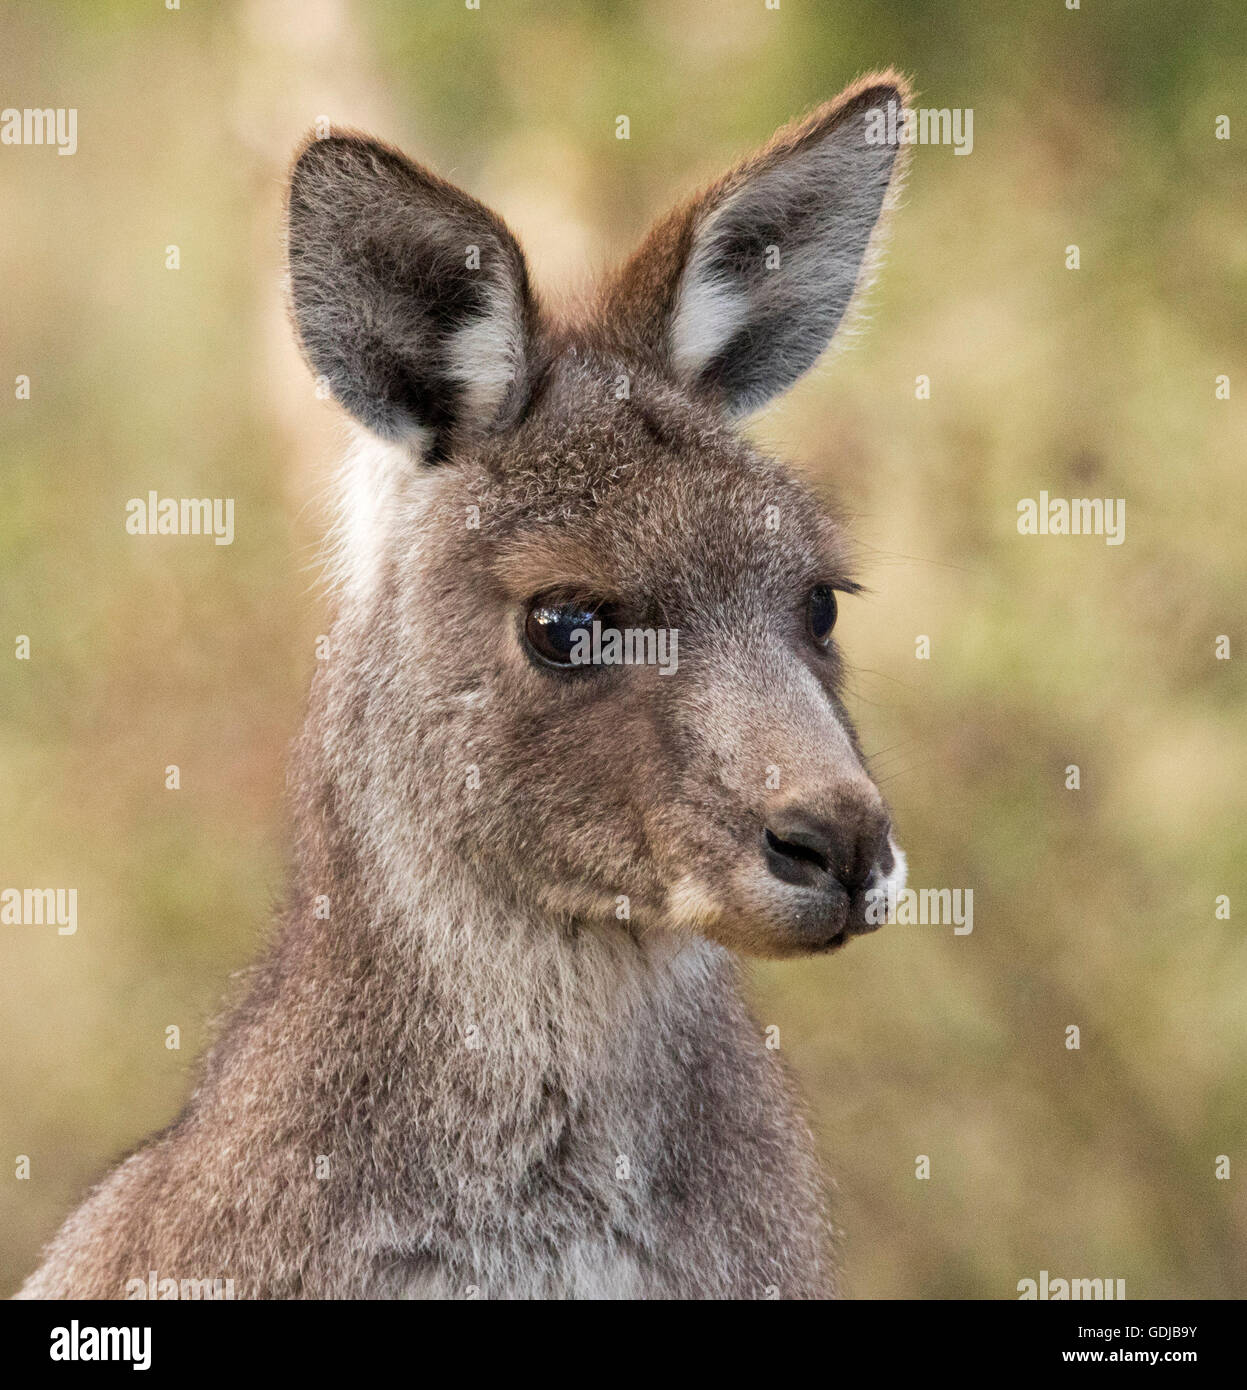 Beautiful face of iconic eastern grey kangaroo Macropus giganteus with gleaming eyes and alert expression in the wild in outback Australia Stock Photo